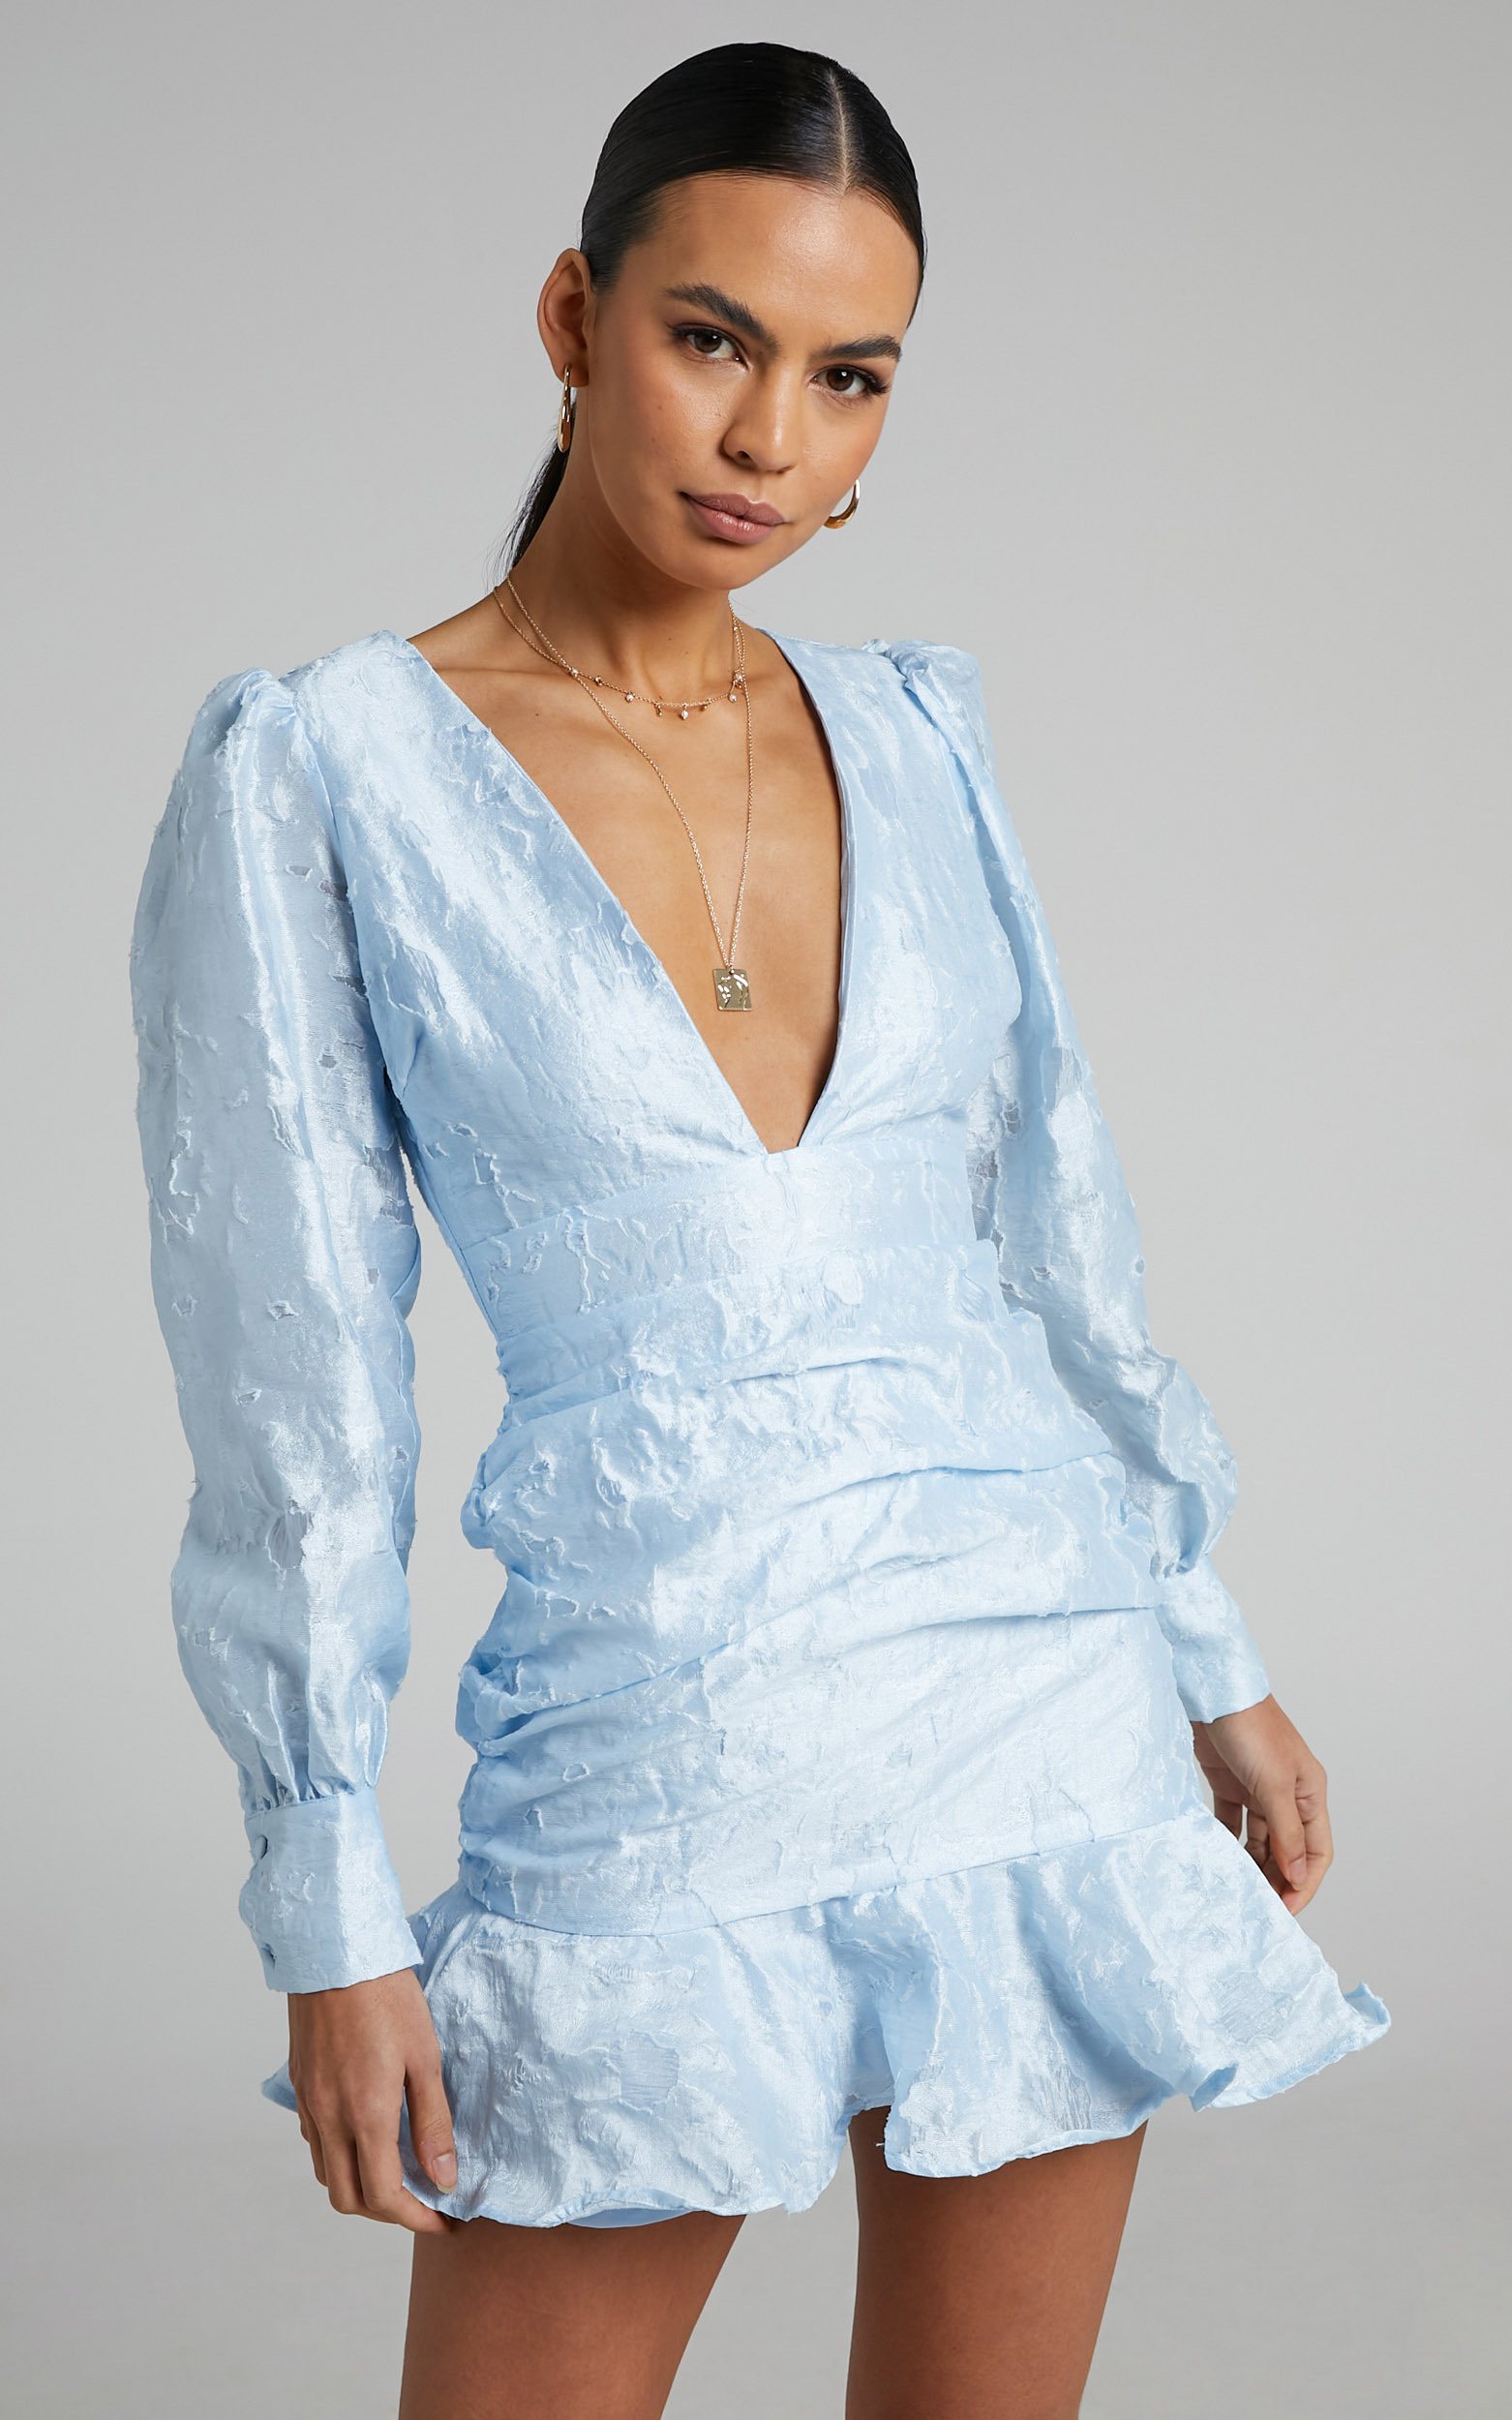 Baxia Textured Balloon Sleeve Mini Dress in Light Blue - 04, BLU1, hi-res image number null